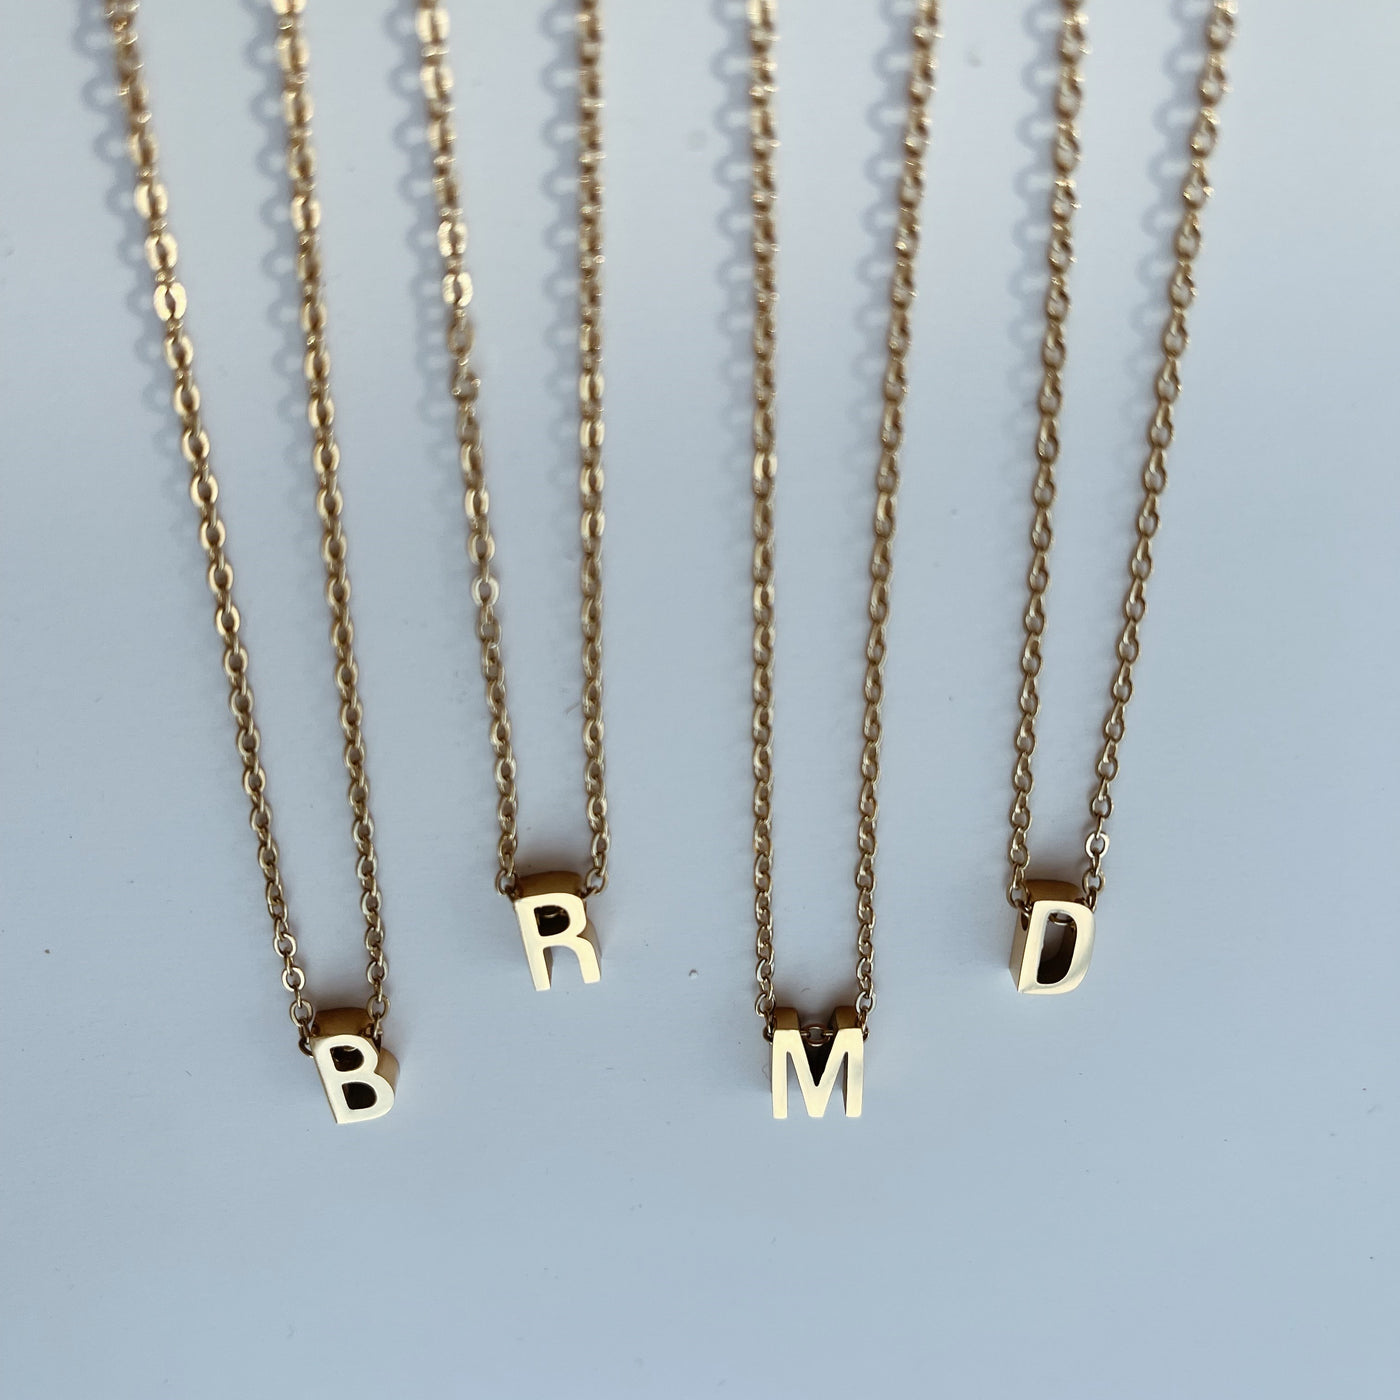 Petite gold initial necklace